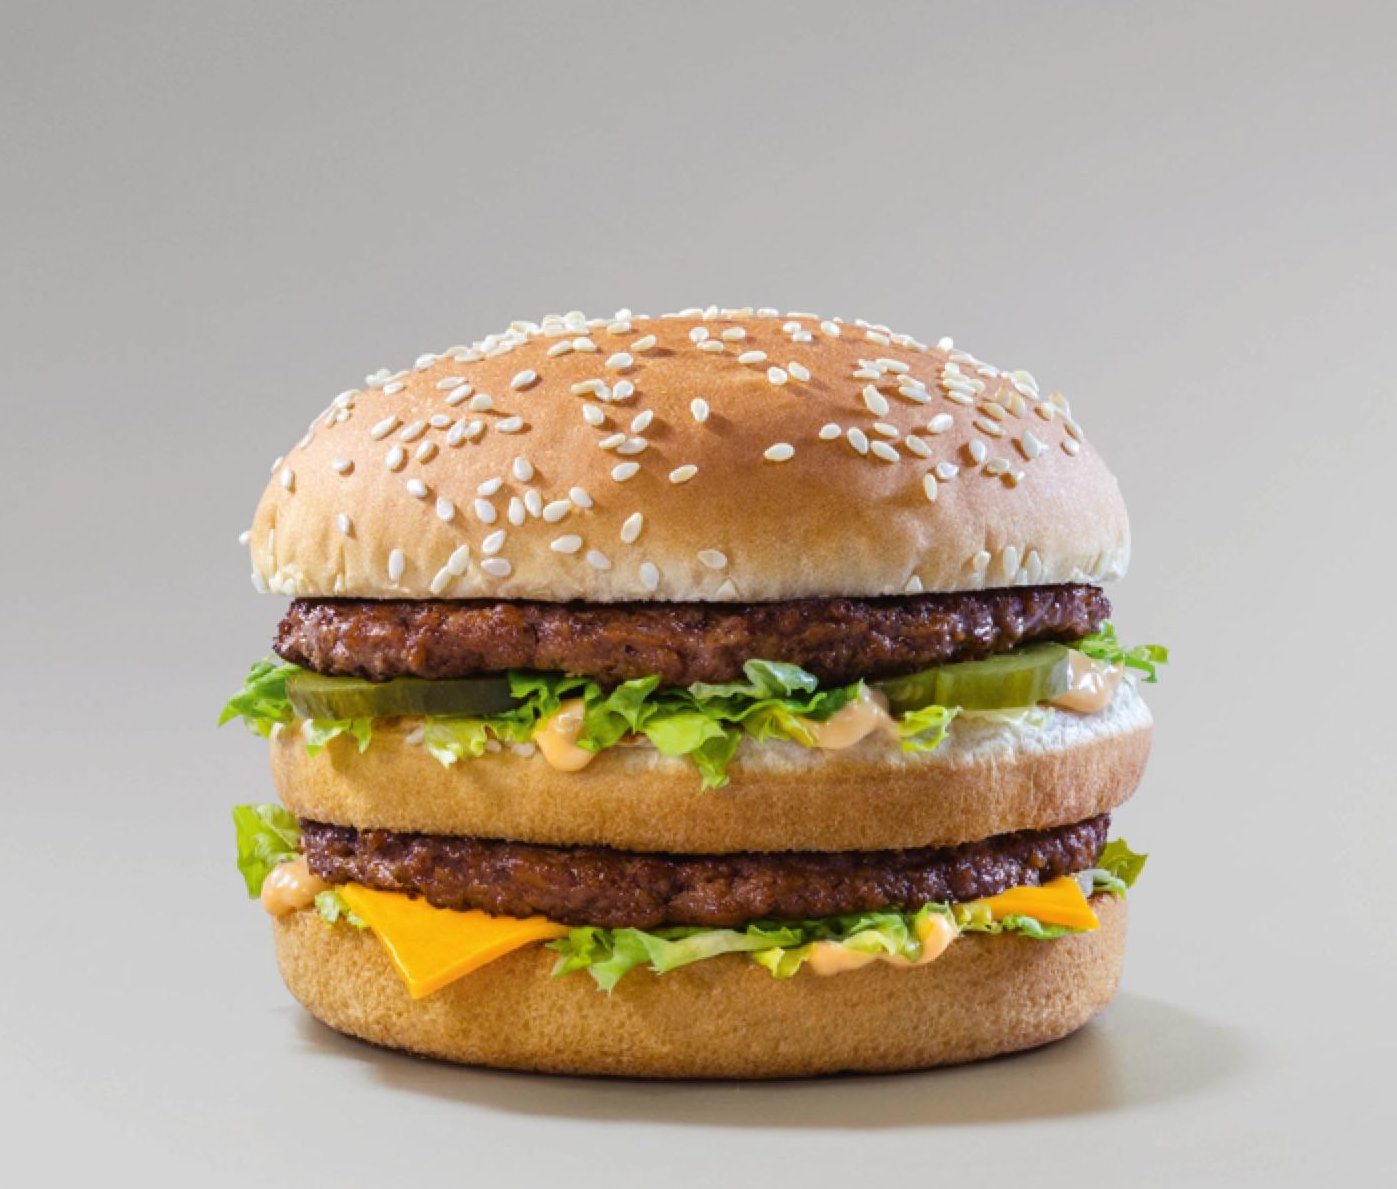 is big mac on 2 for 5 menuapril 2017